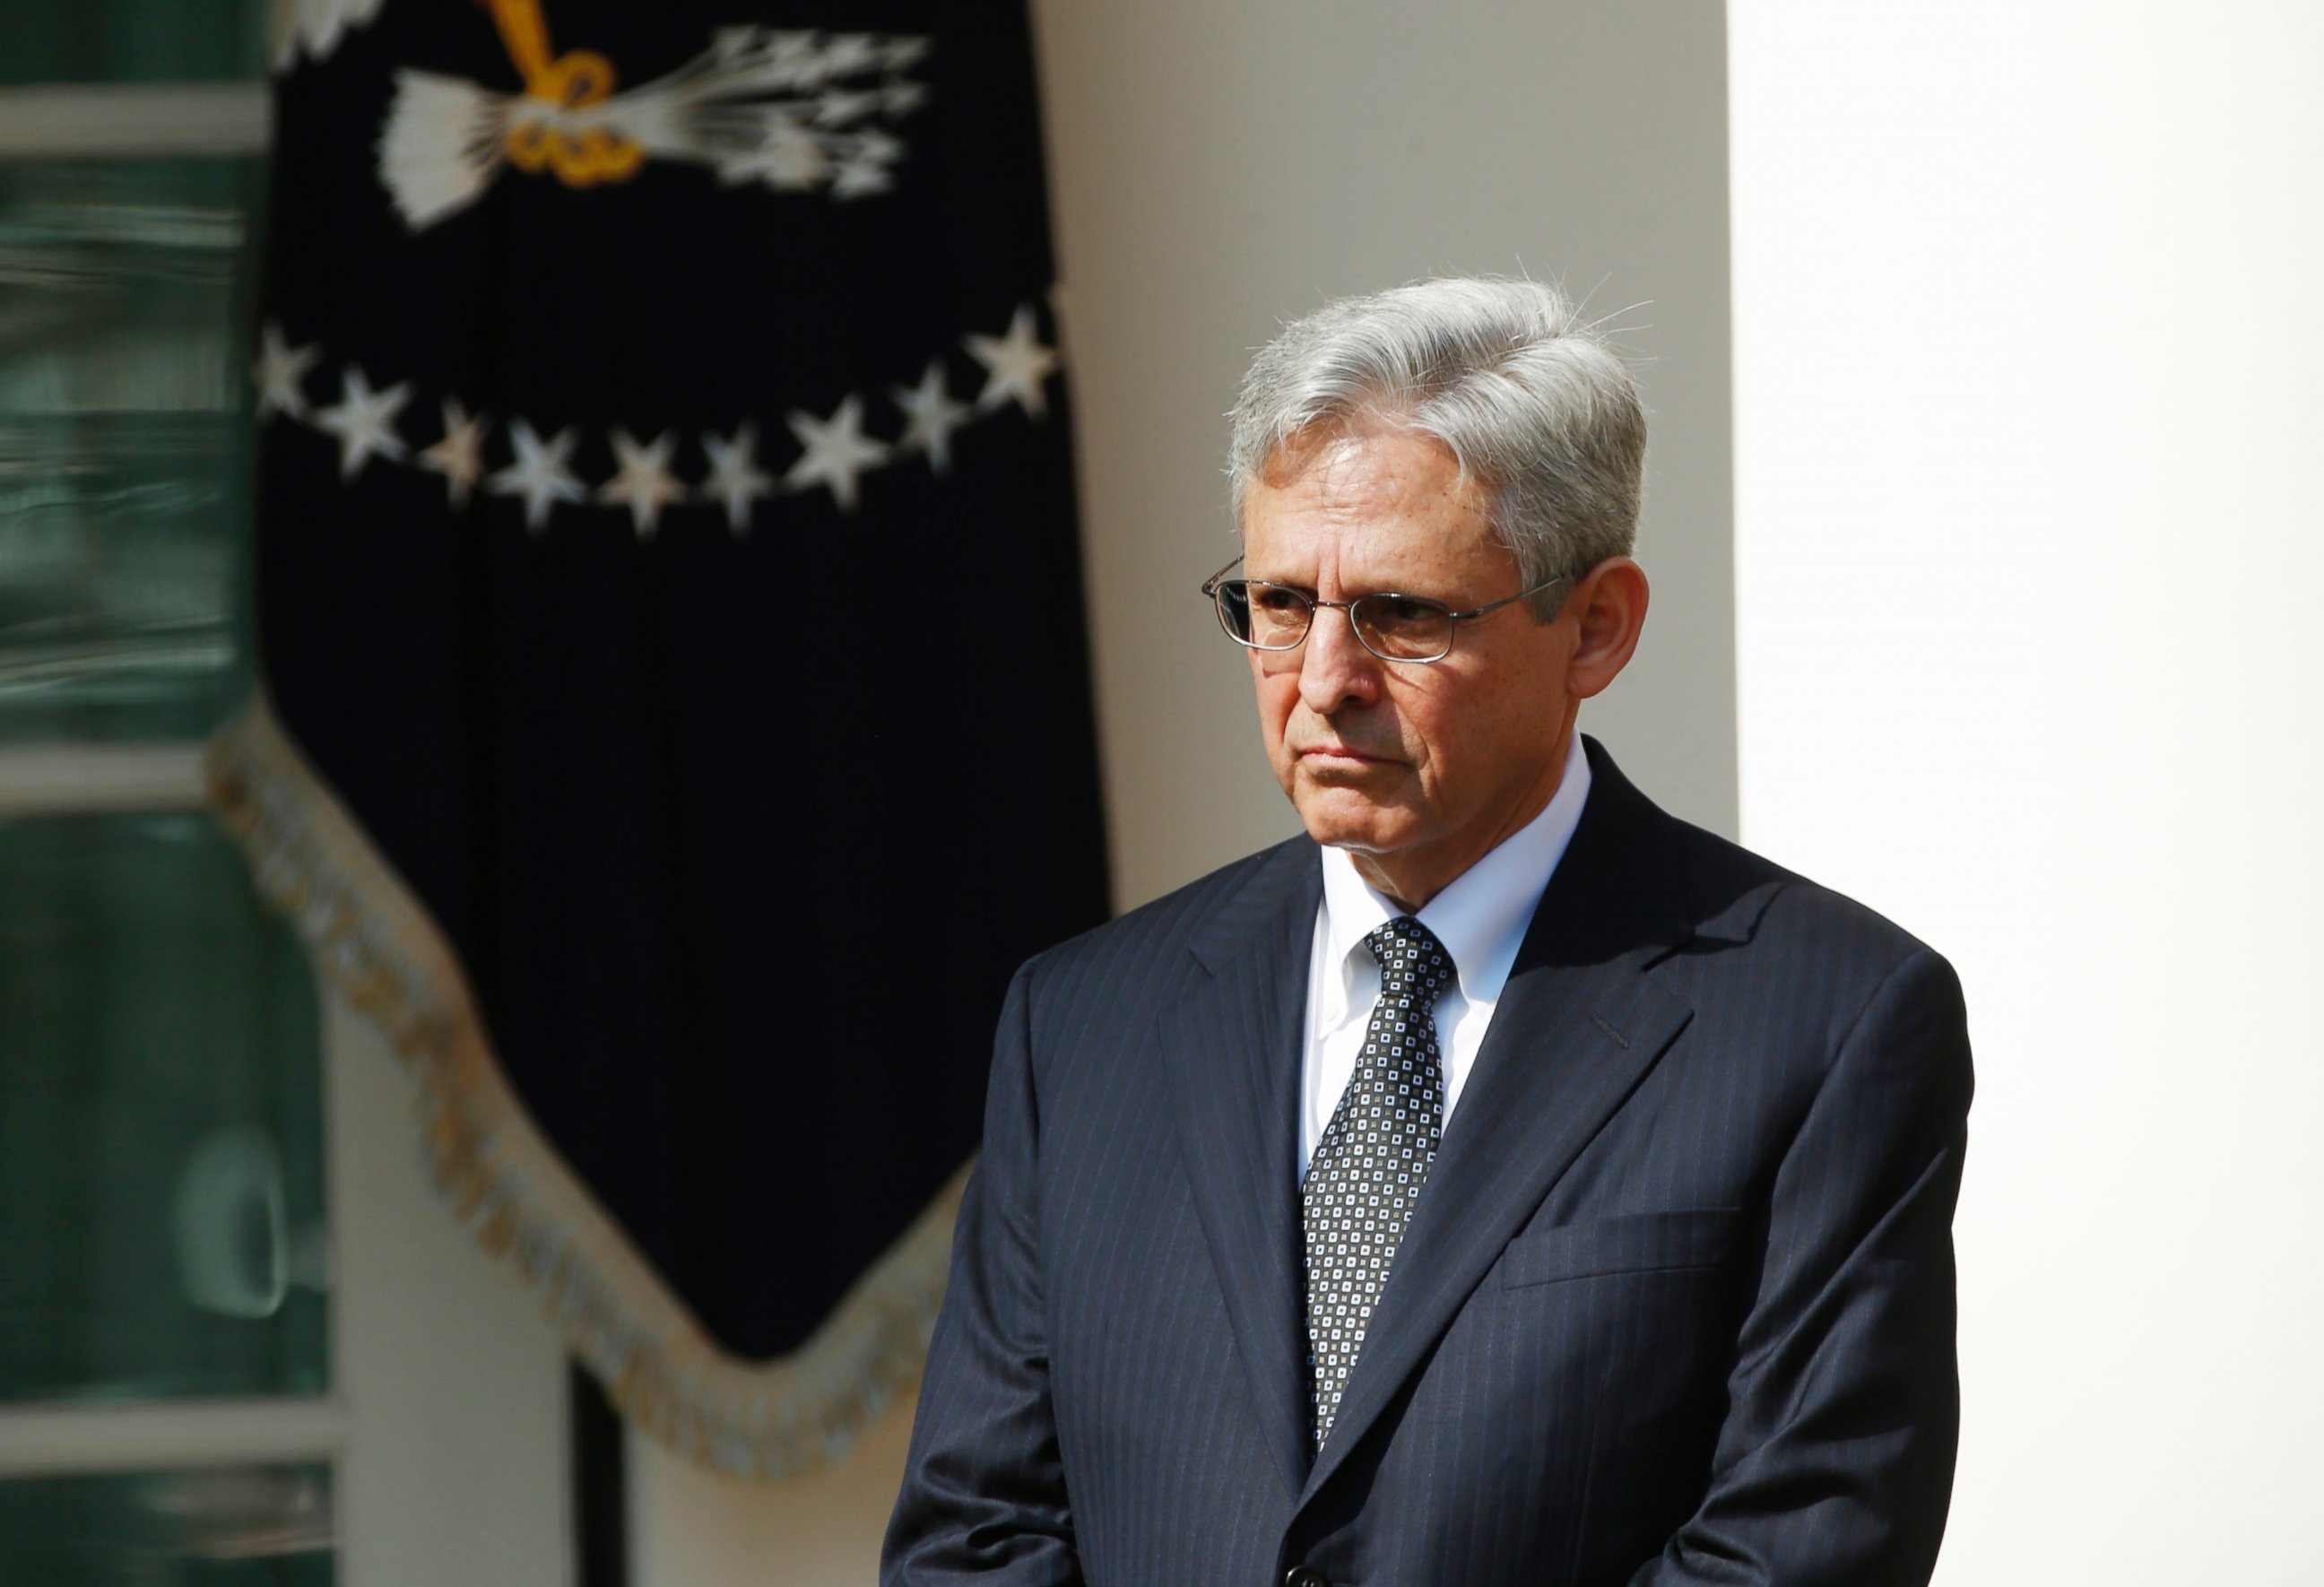 PHOTO: President Barack Obama (not pictured) announces Judge Merrick Garland of the United States Court of Appeals as his nominee for the U.S. Supreme Court in Washington, March 16, 2016.       